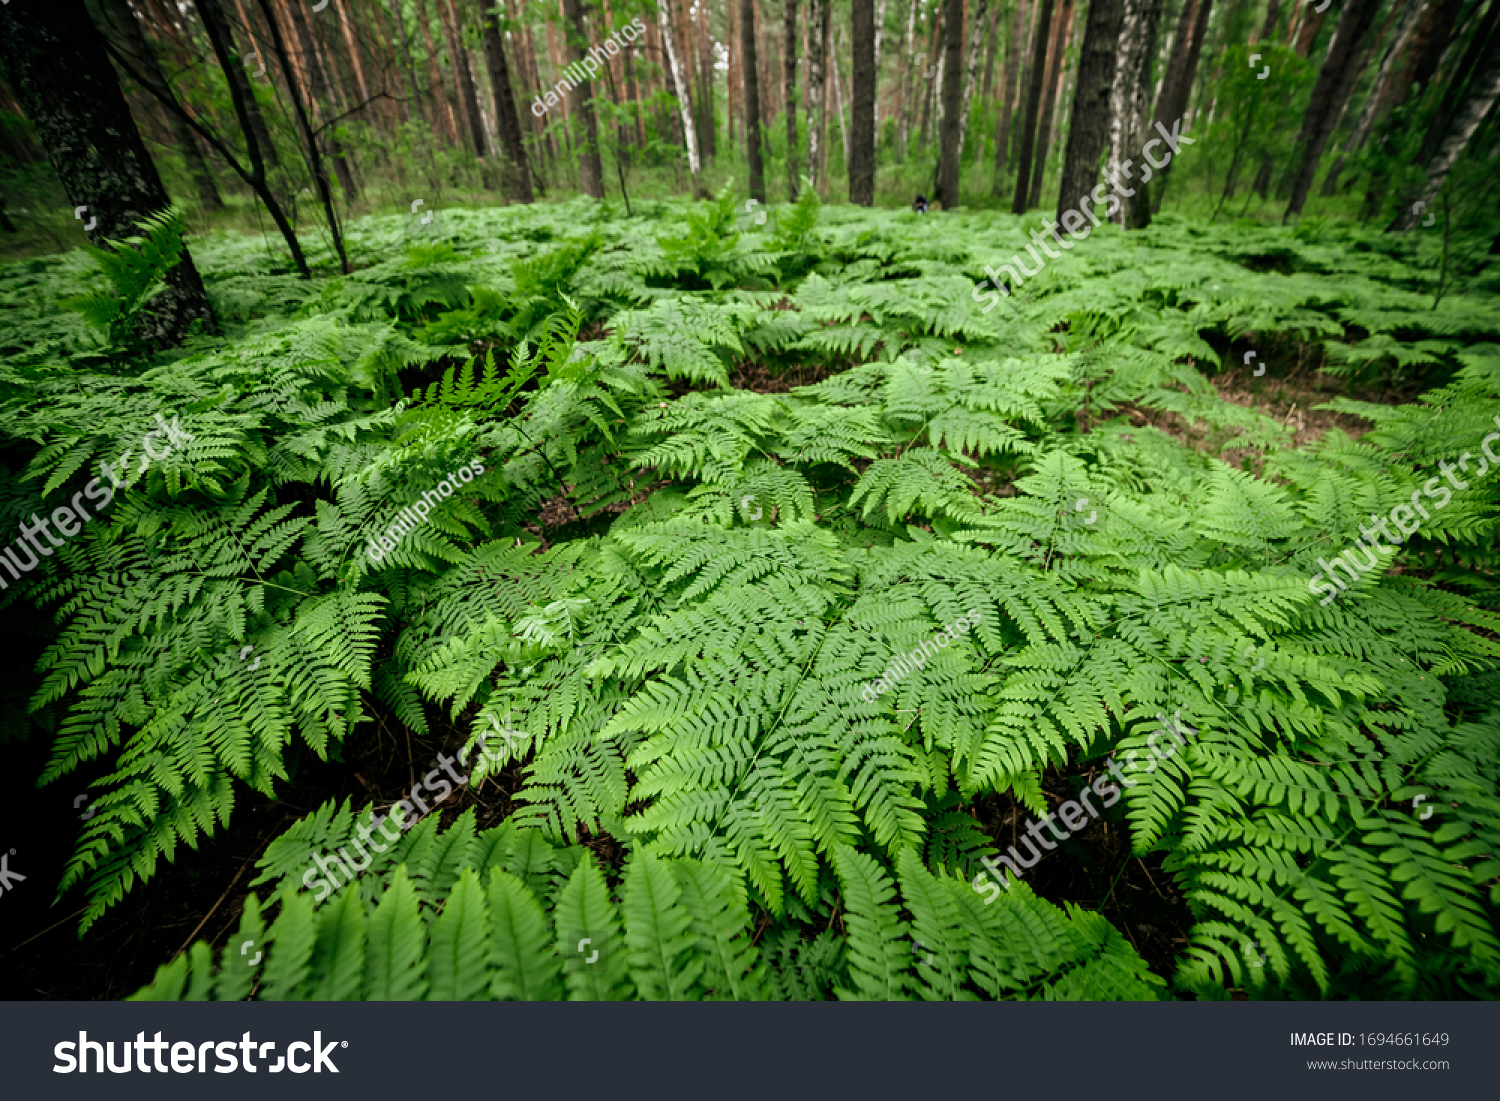 Dense fern thickets close-up. Beautiful nature background with many ferns in scenic forest. Rich greenery among trees. Chaotic wild ferns in forest thicket. Vivid green texture of lush fern leaves. #1694661649